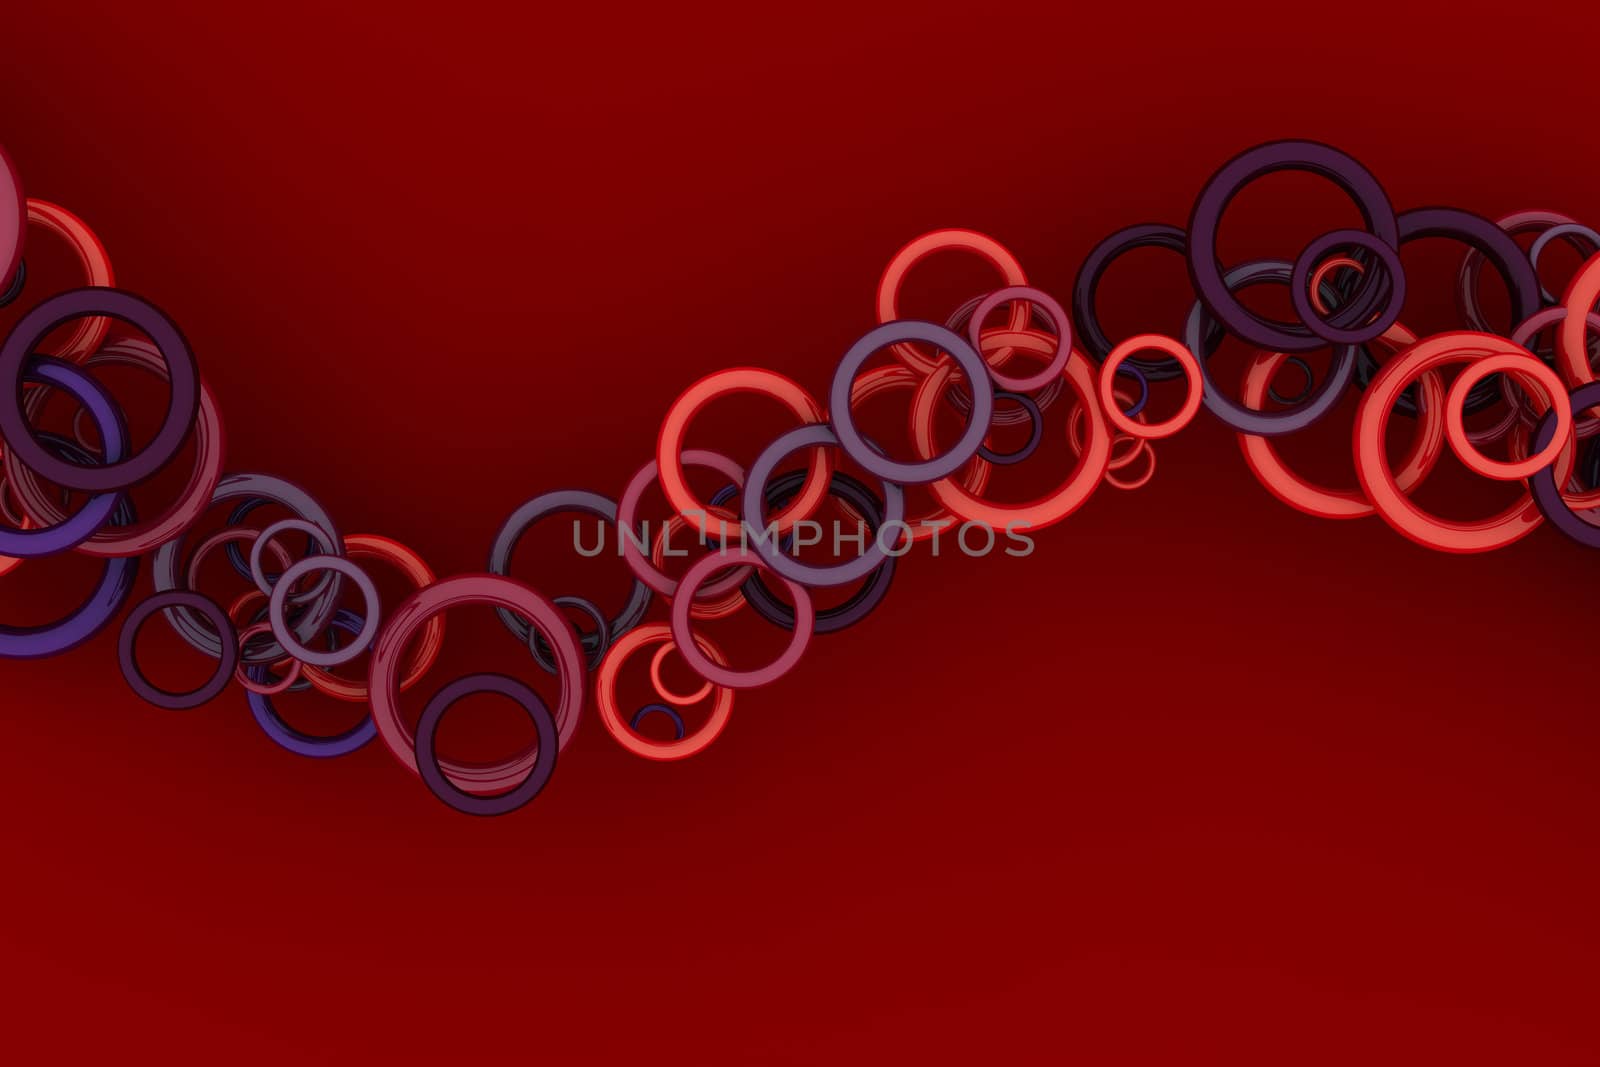 Rings background by timbrk